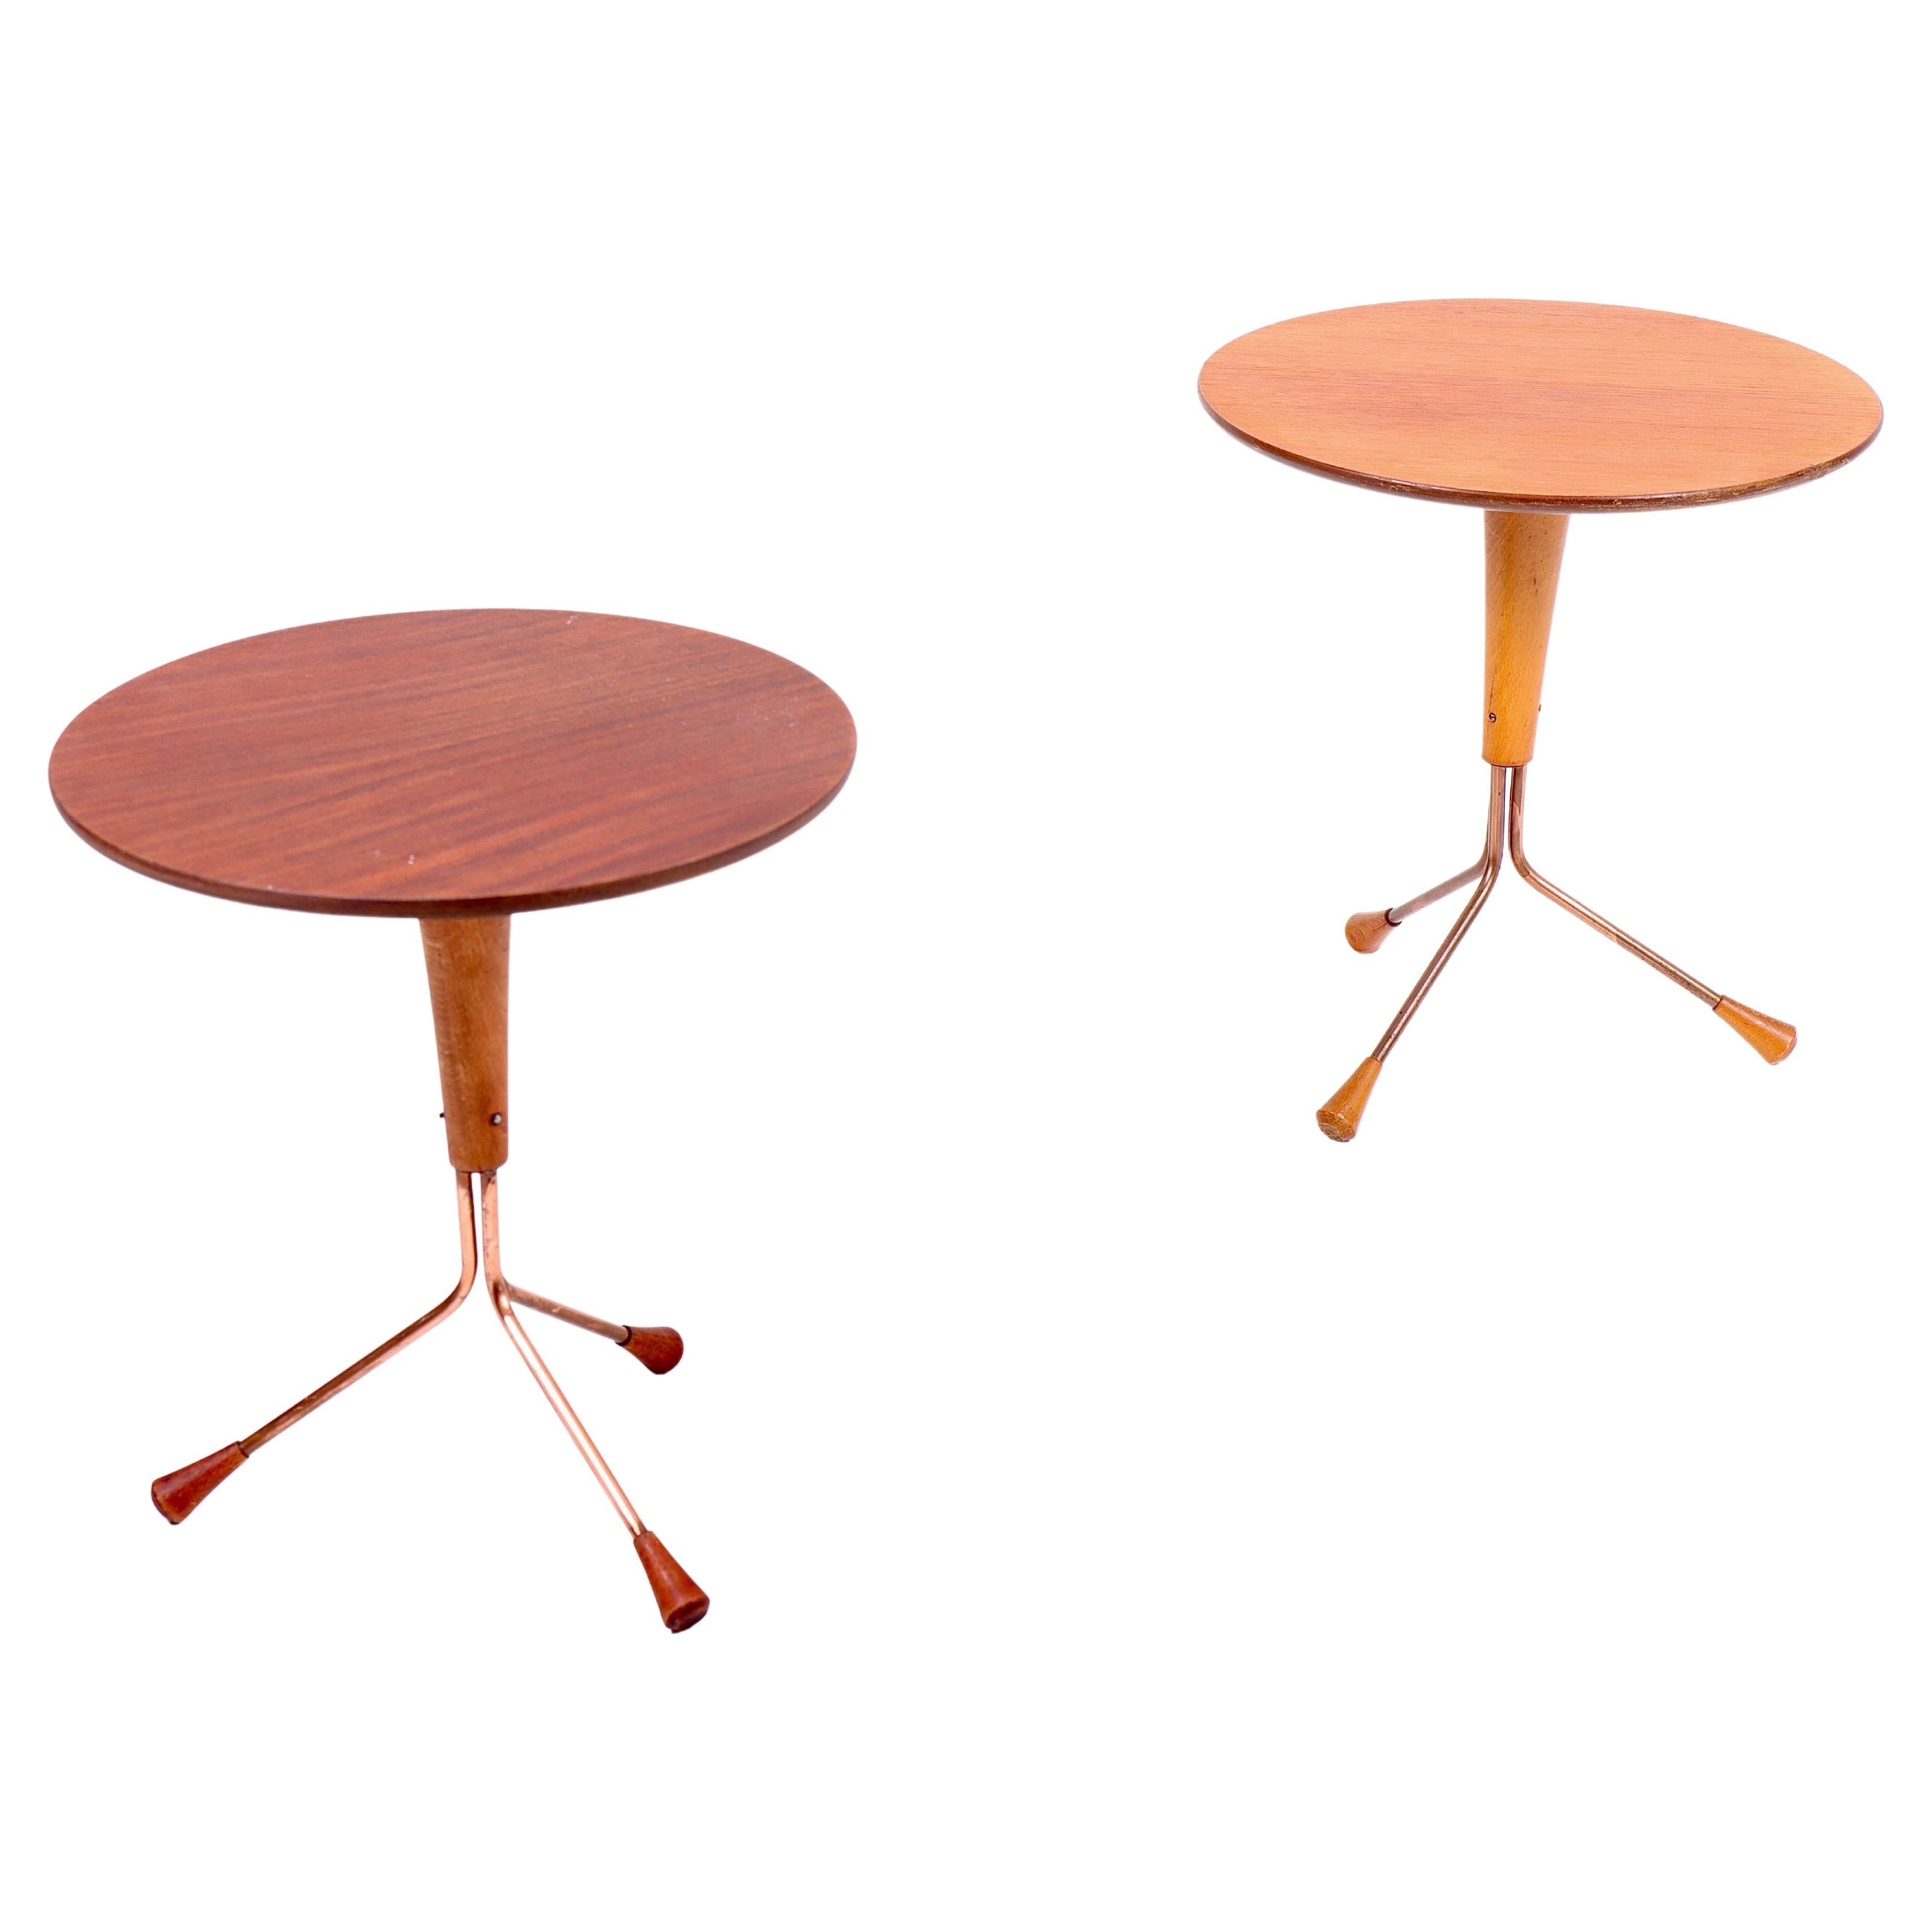 Two Midcentury Side Tables in Teak and Mahogany by Albert Larsson, 1960s